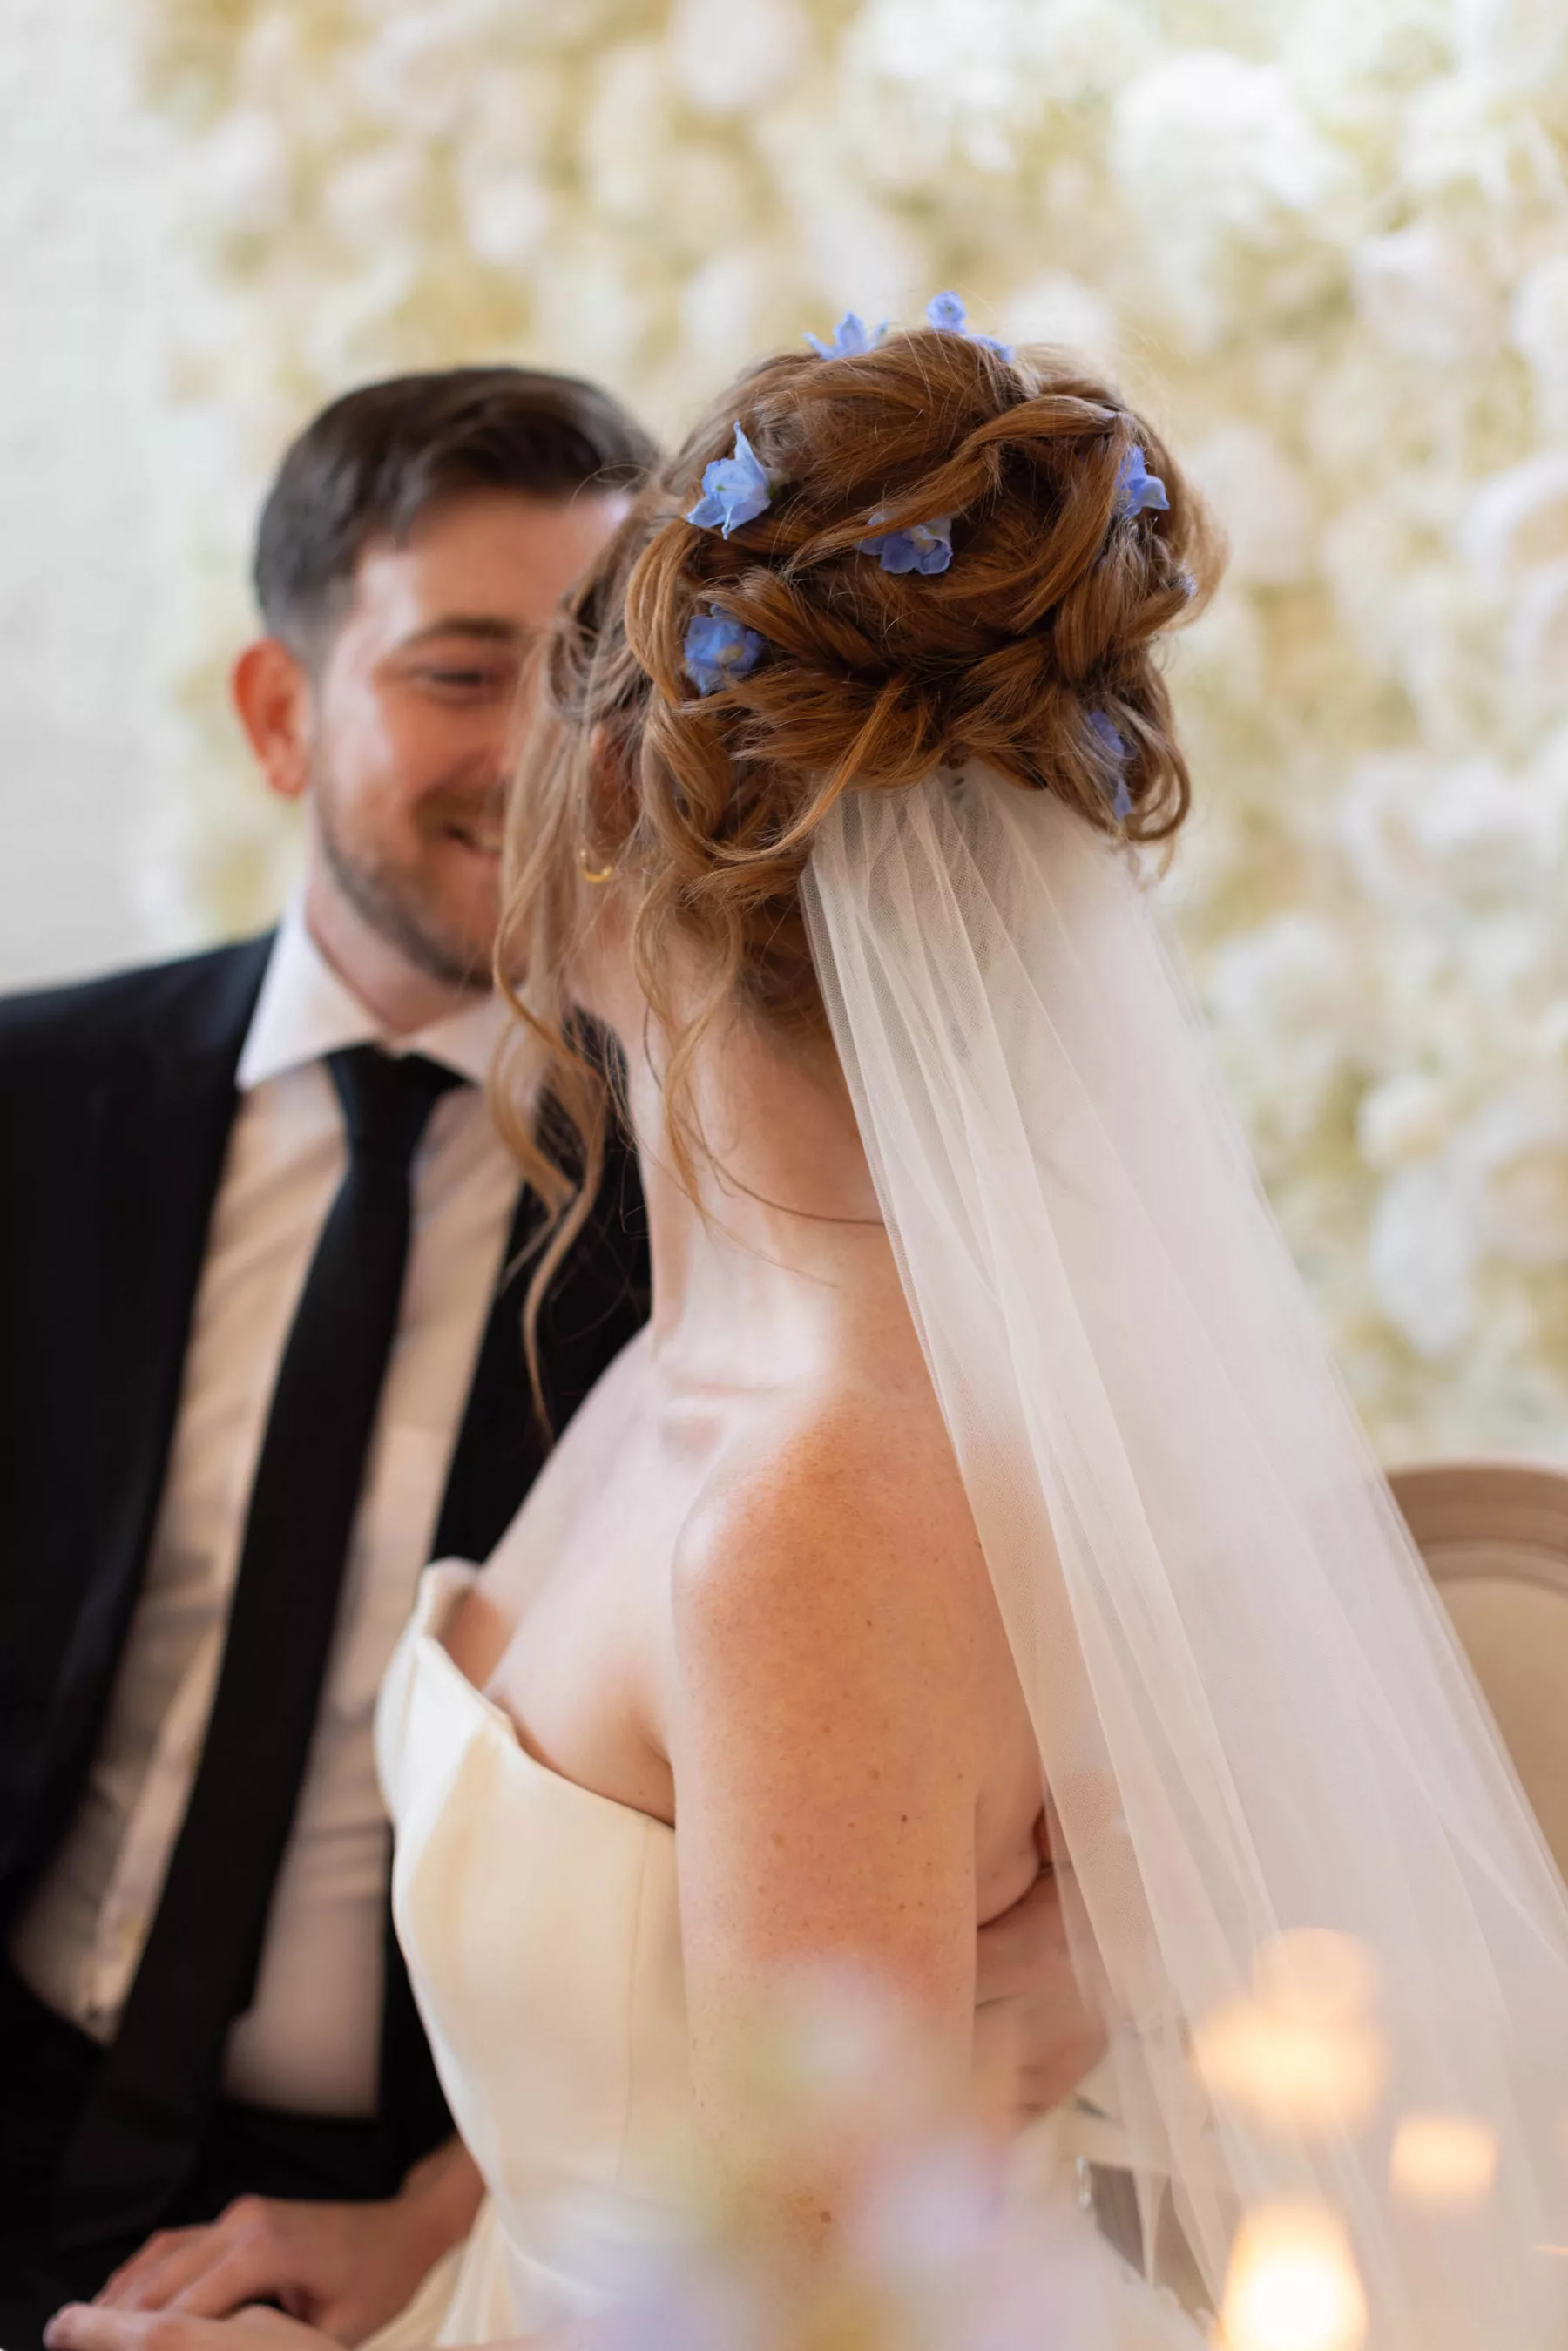 Whimsical Bridal Wedding Hair Updo with Blue Flowers Inspiration | Tampa Hair and Makeup Femme Akoi Beauty Studio